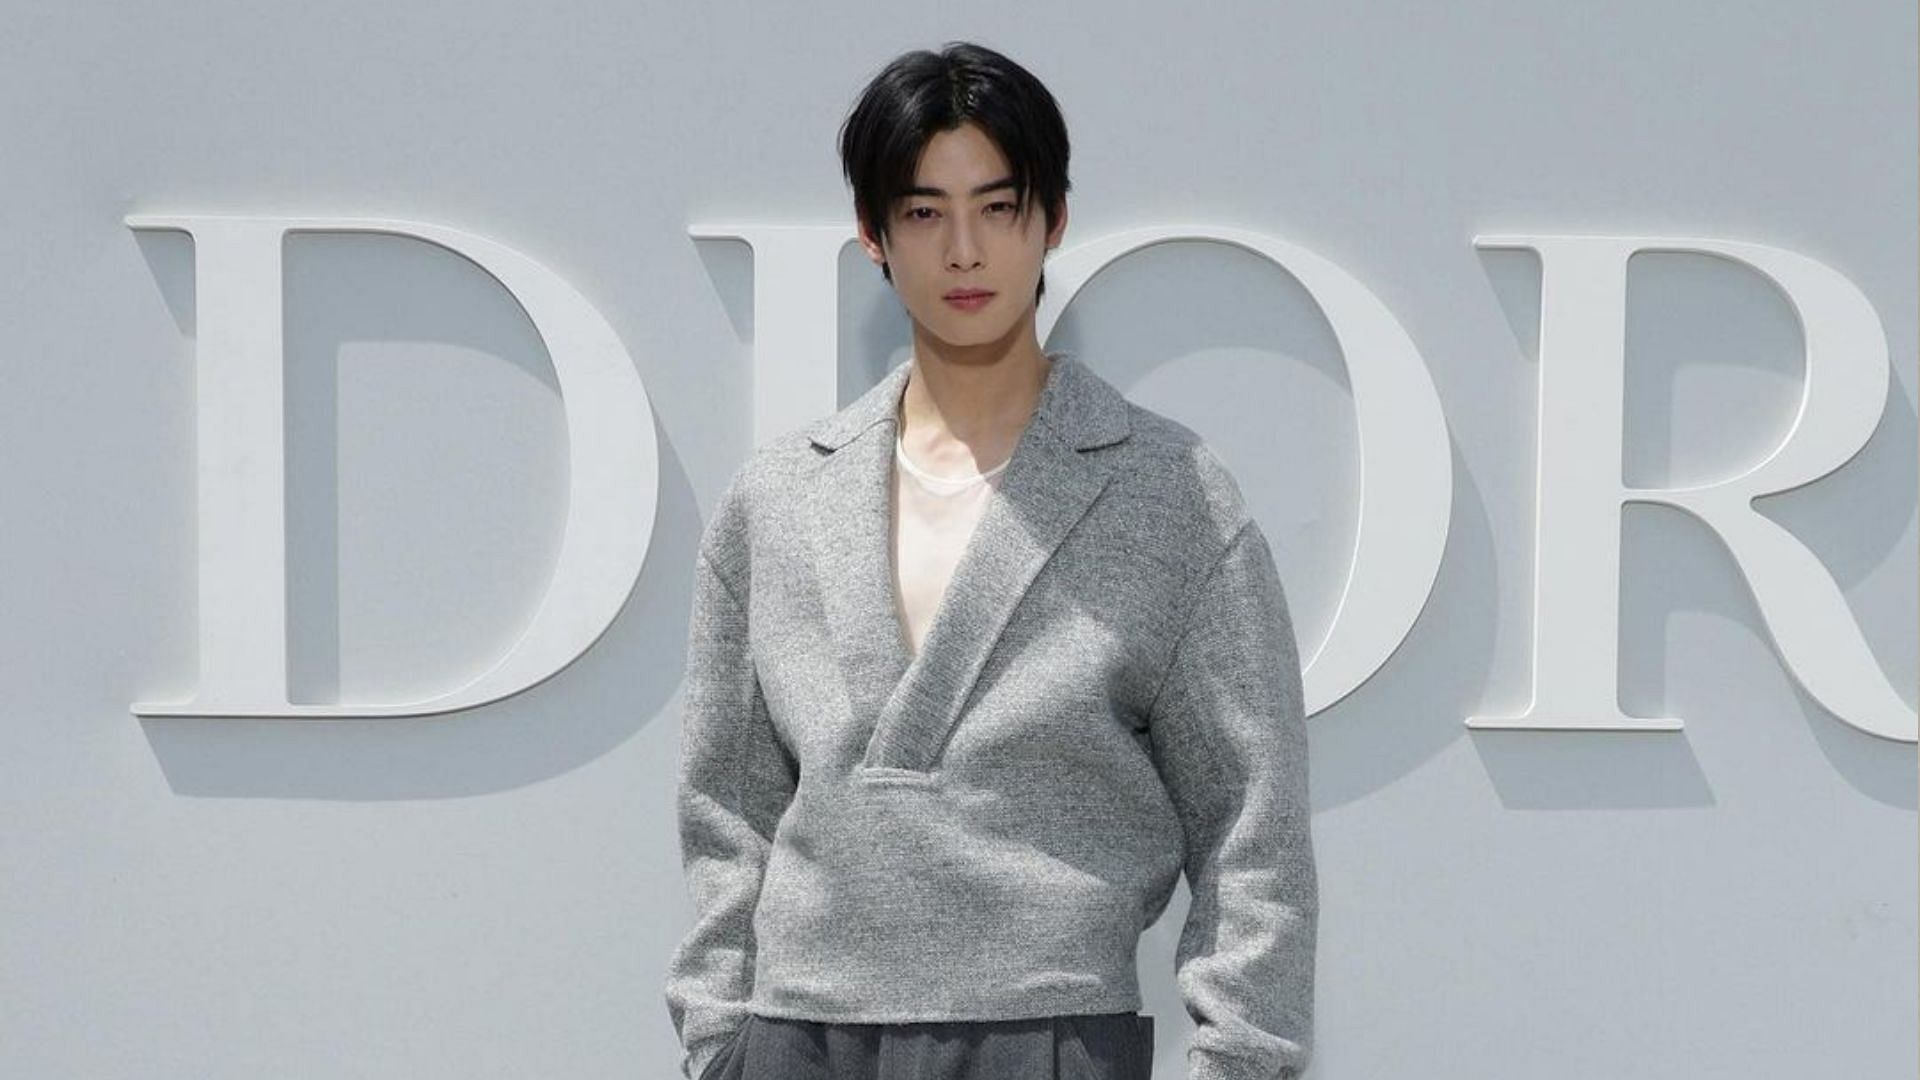 You all are foolin' no one”: Netizens defend Cha Eun-woo pulling